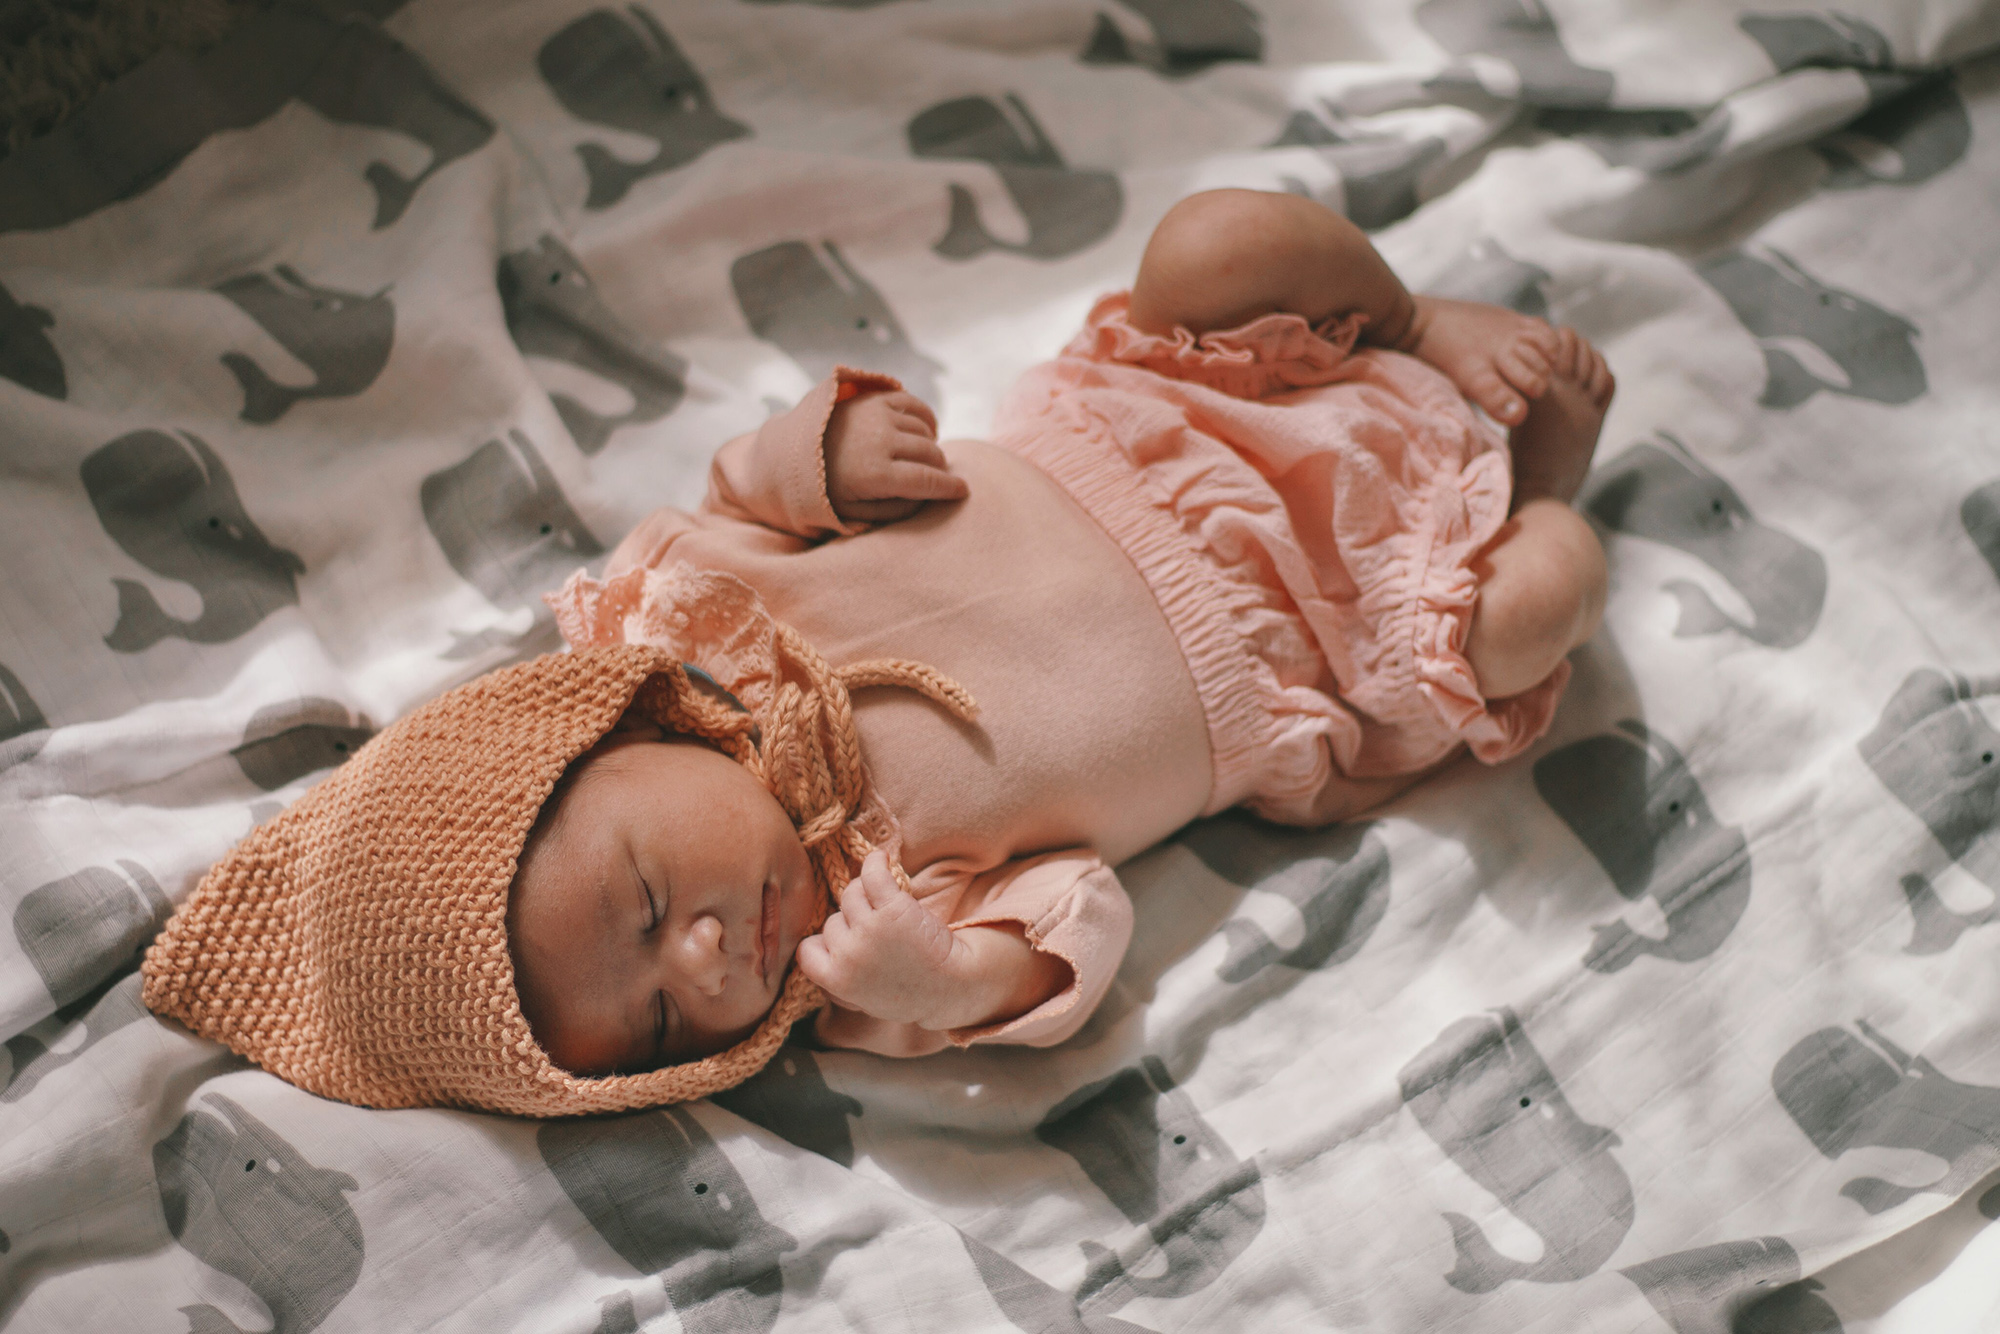 a 10 day old baby dressed in pink